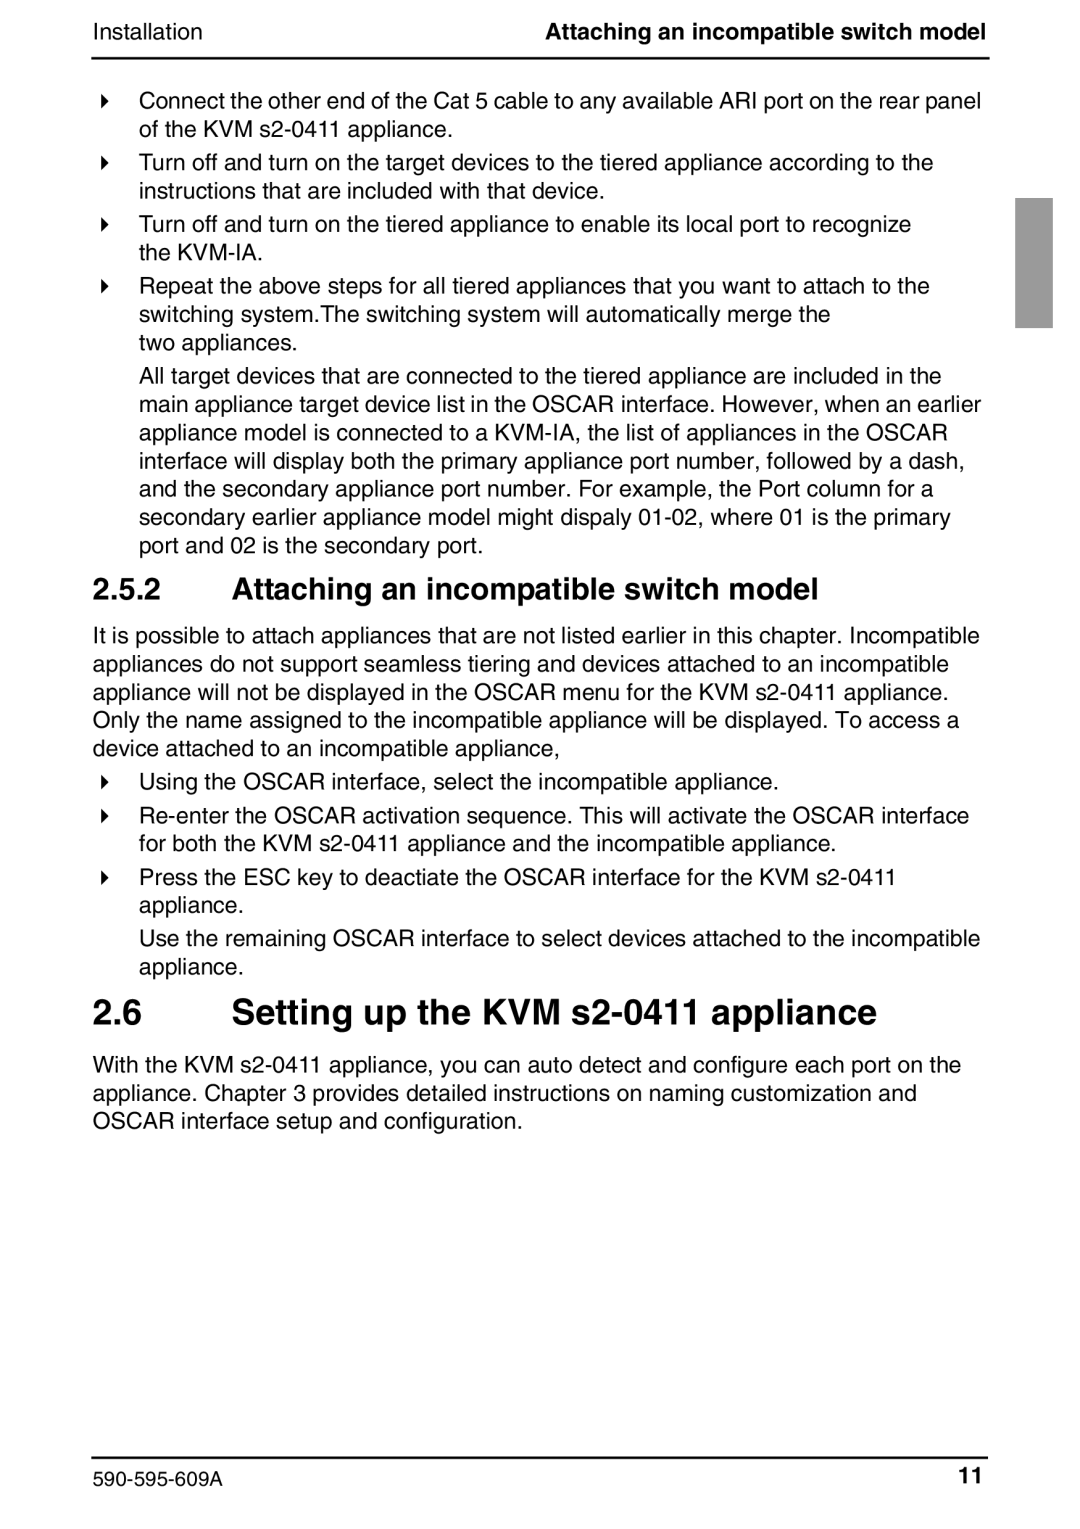 Siemens manual Setting up the KVM s2-0411 appliance, Attaching an incompatible switch model 